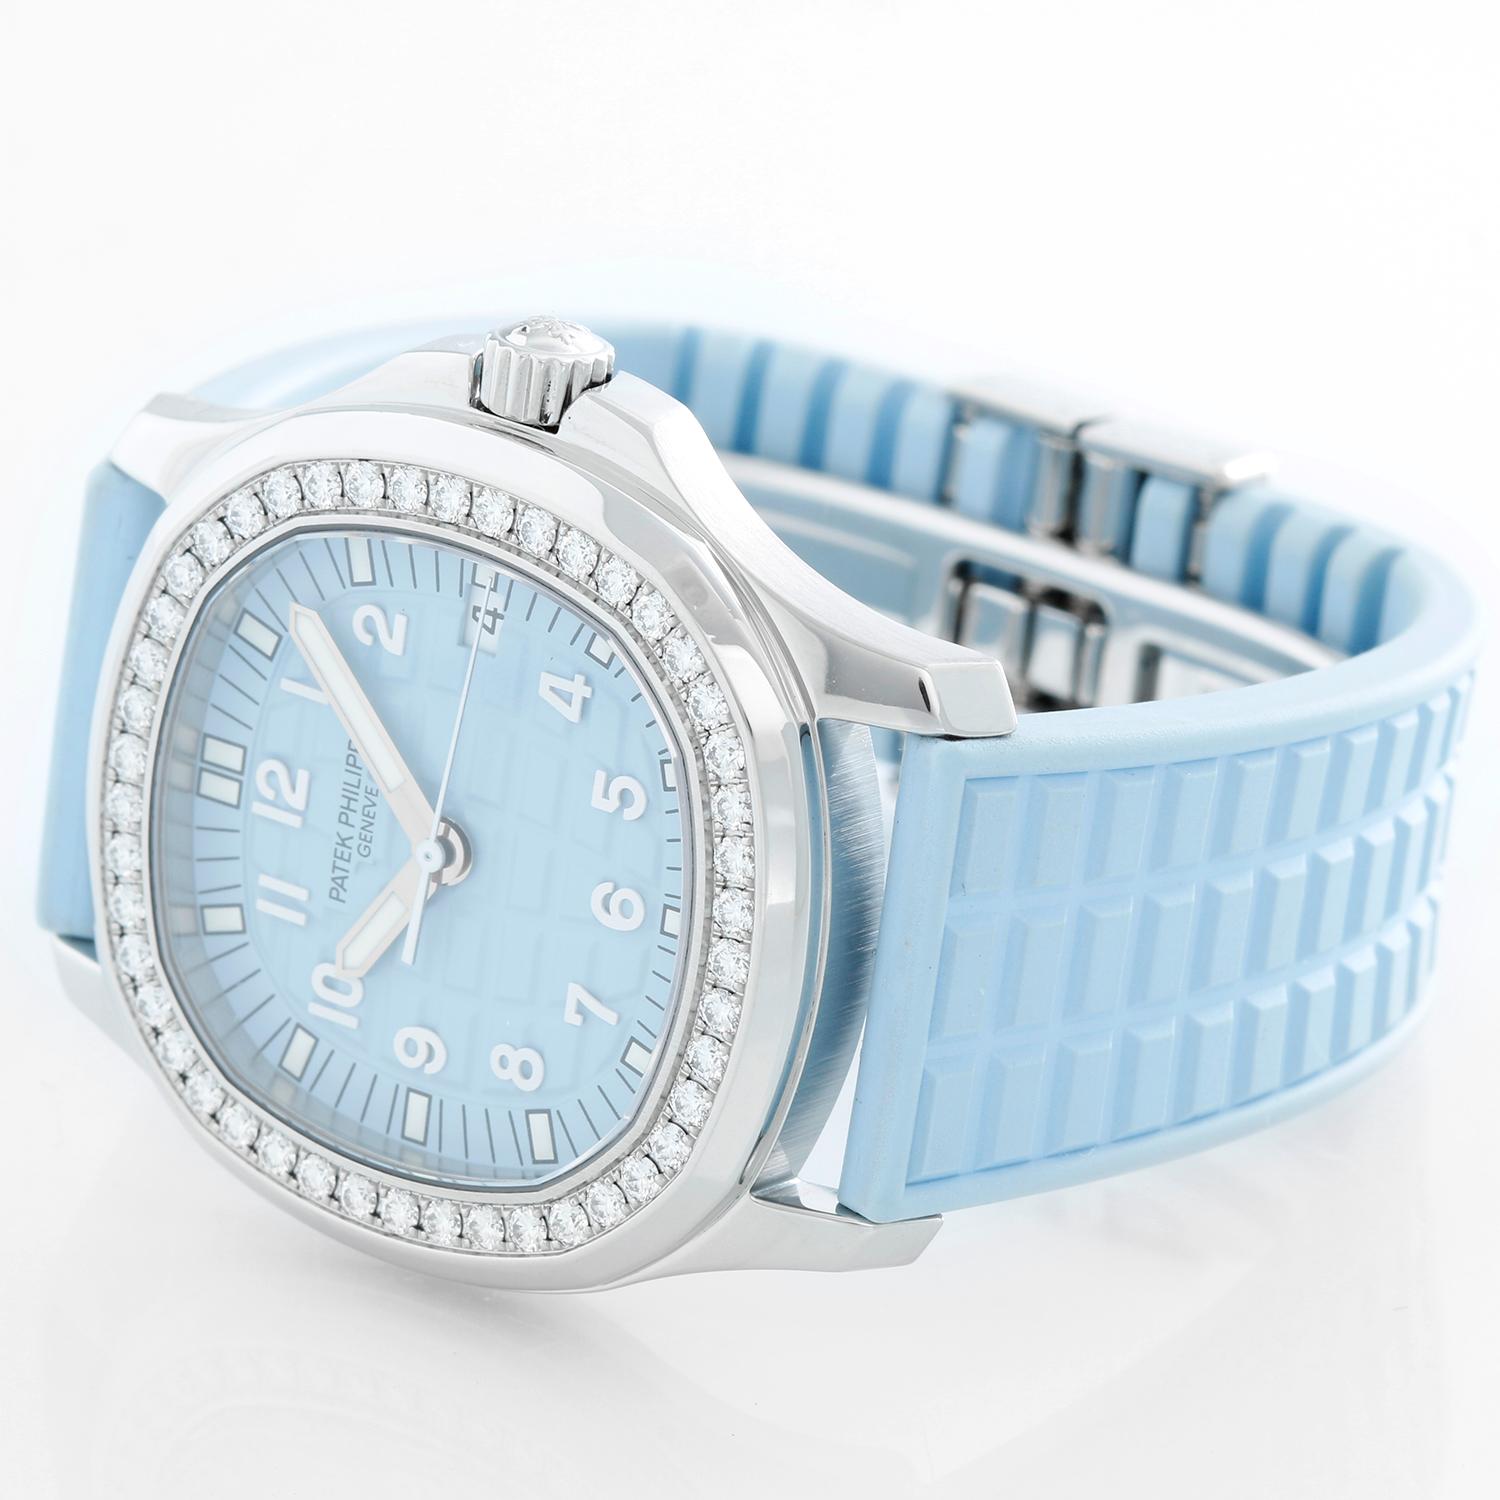 Patek Philippe Aquanaut Luce Ladies Stainless Steel Diamond White Watch 5067 - Quartz. Stainless steel case with diamond bezel (34mm diameter). Baby blue waffle dial with white Arabic numerals. Baby blue rubber strap band with stainless steel Patek